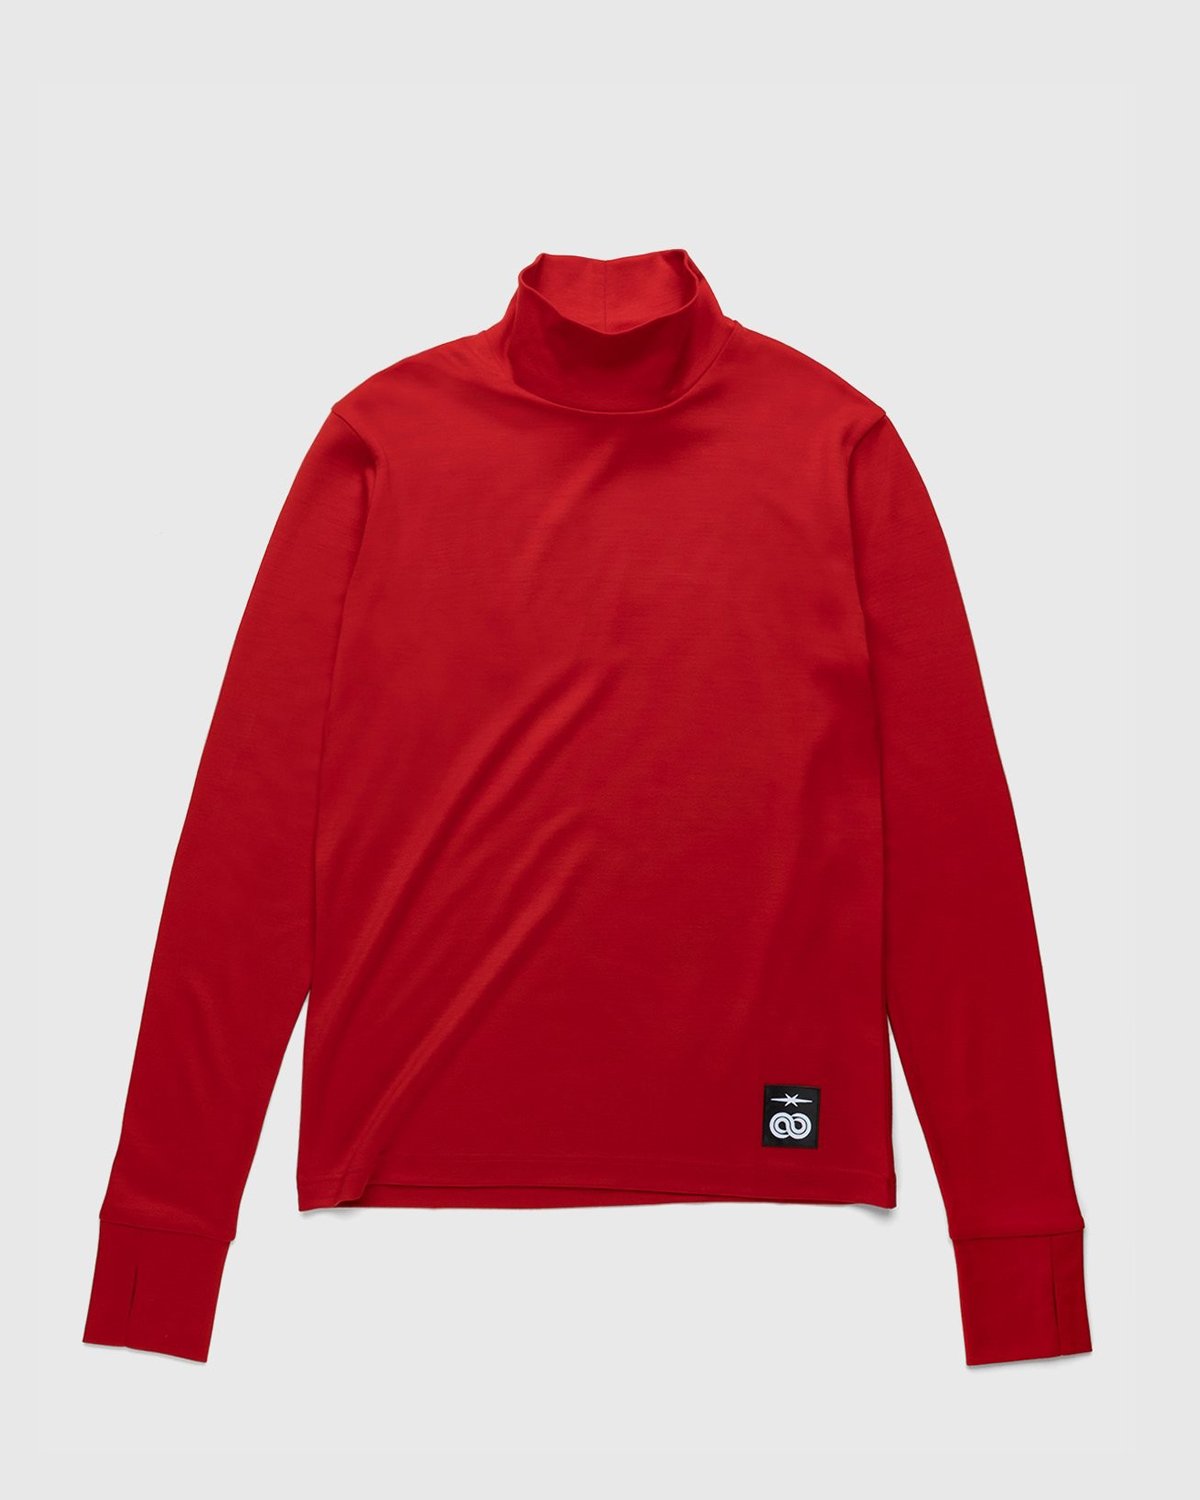 Phipps - Turtleneck Flame - Clothing - Red - Image 1